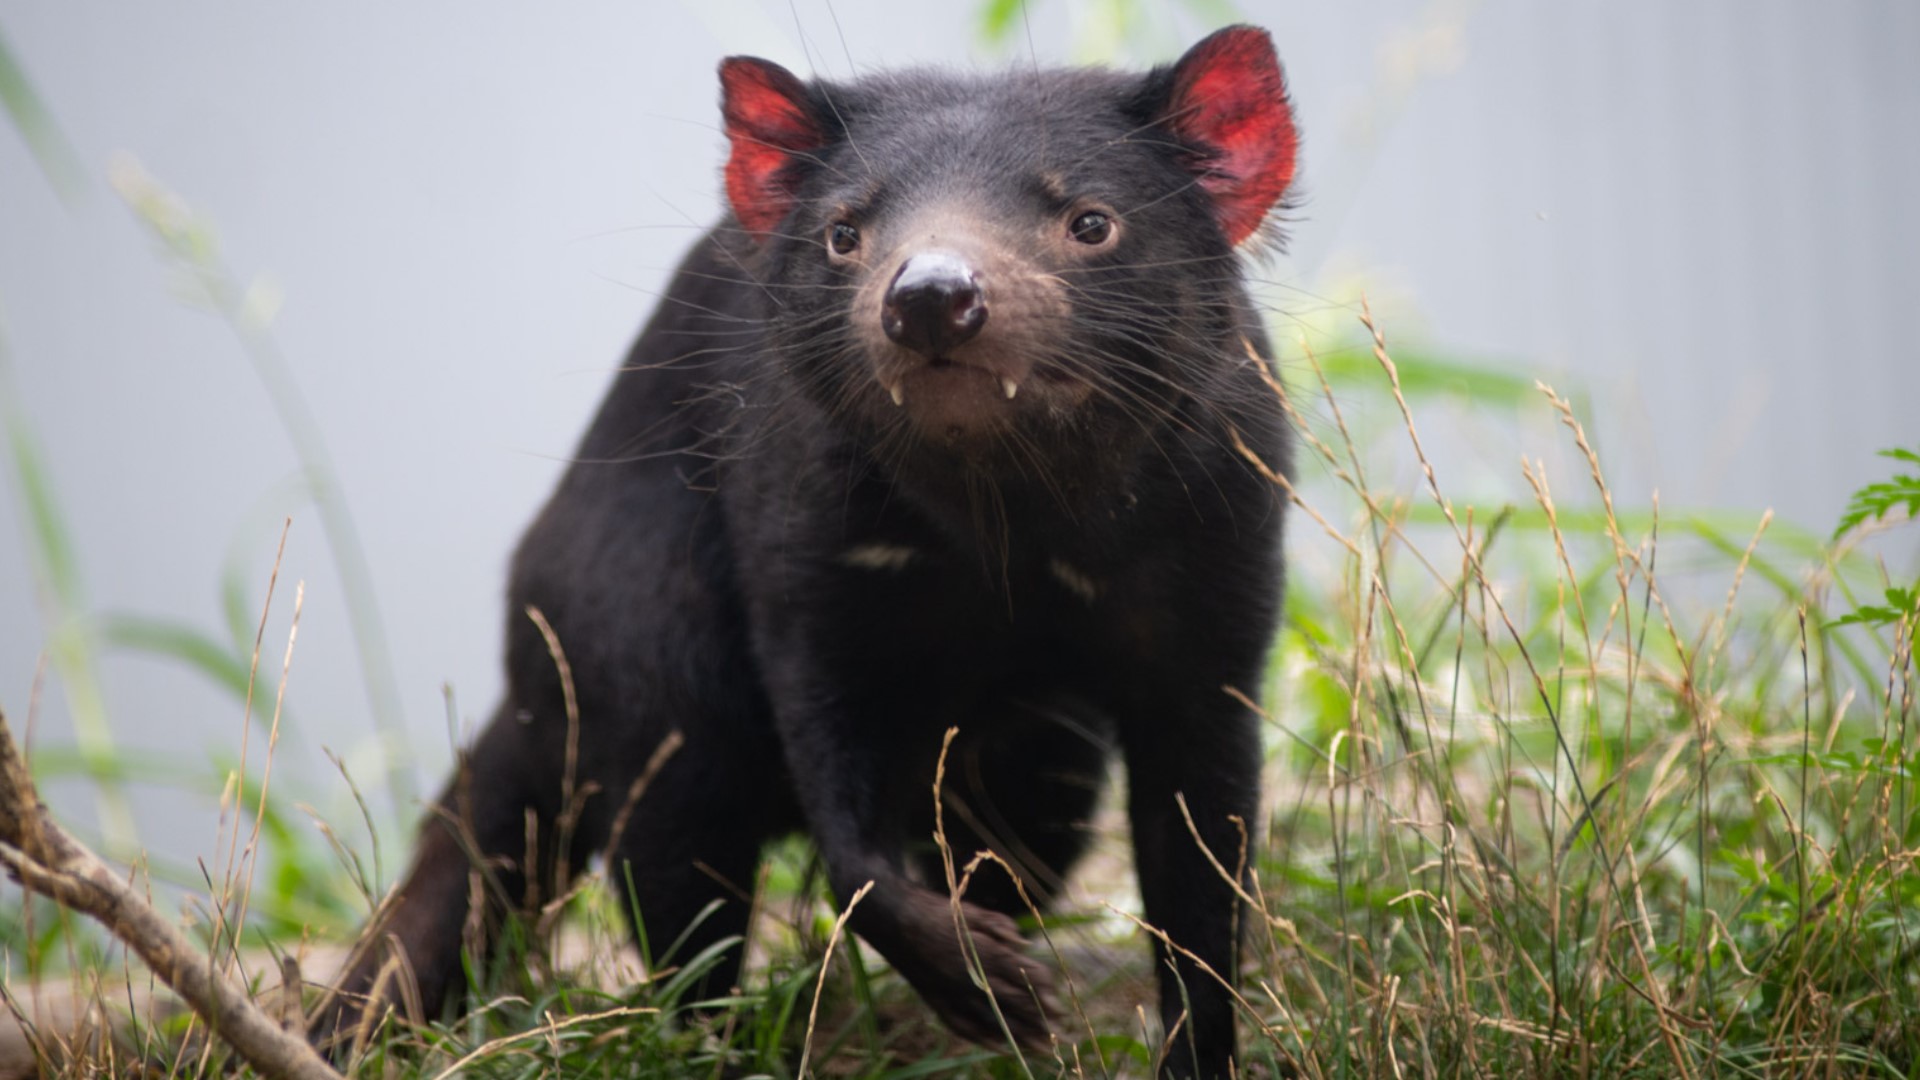 Sprout arrived at the Columbus Zoo in 2019 with his twin sister Thyme through the Save the Tasmanian Devil Program.